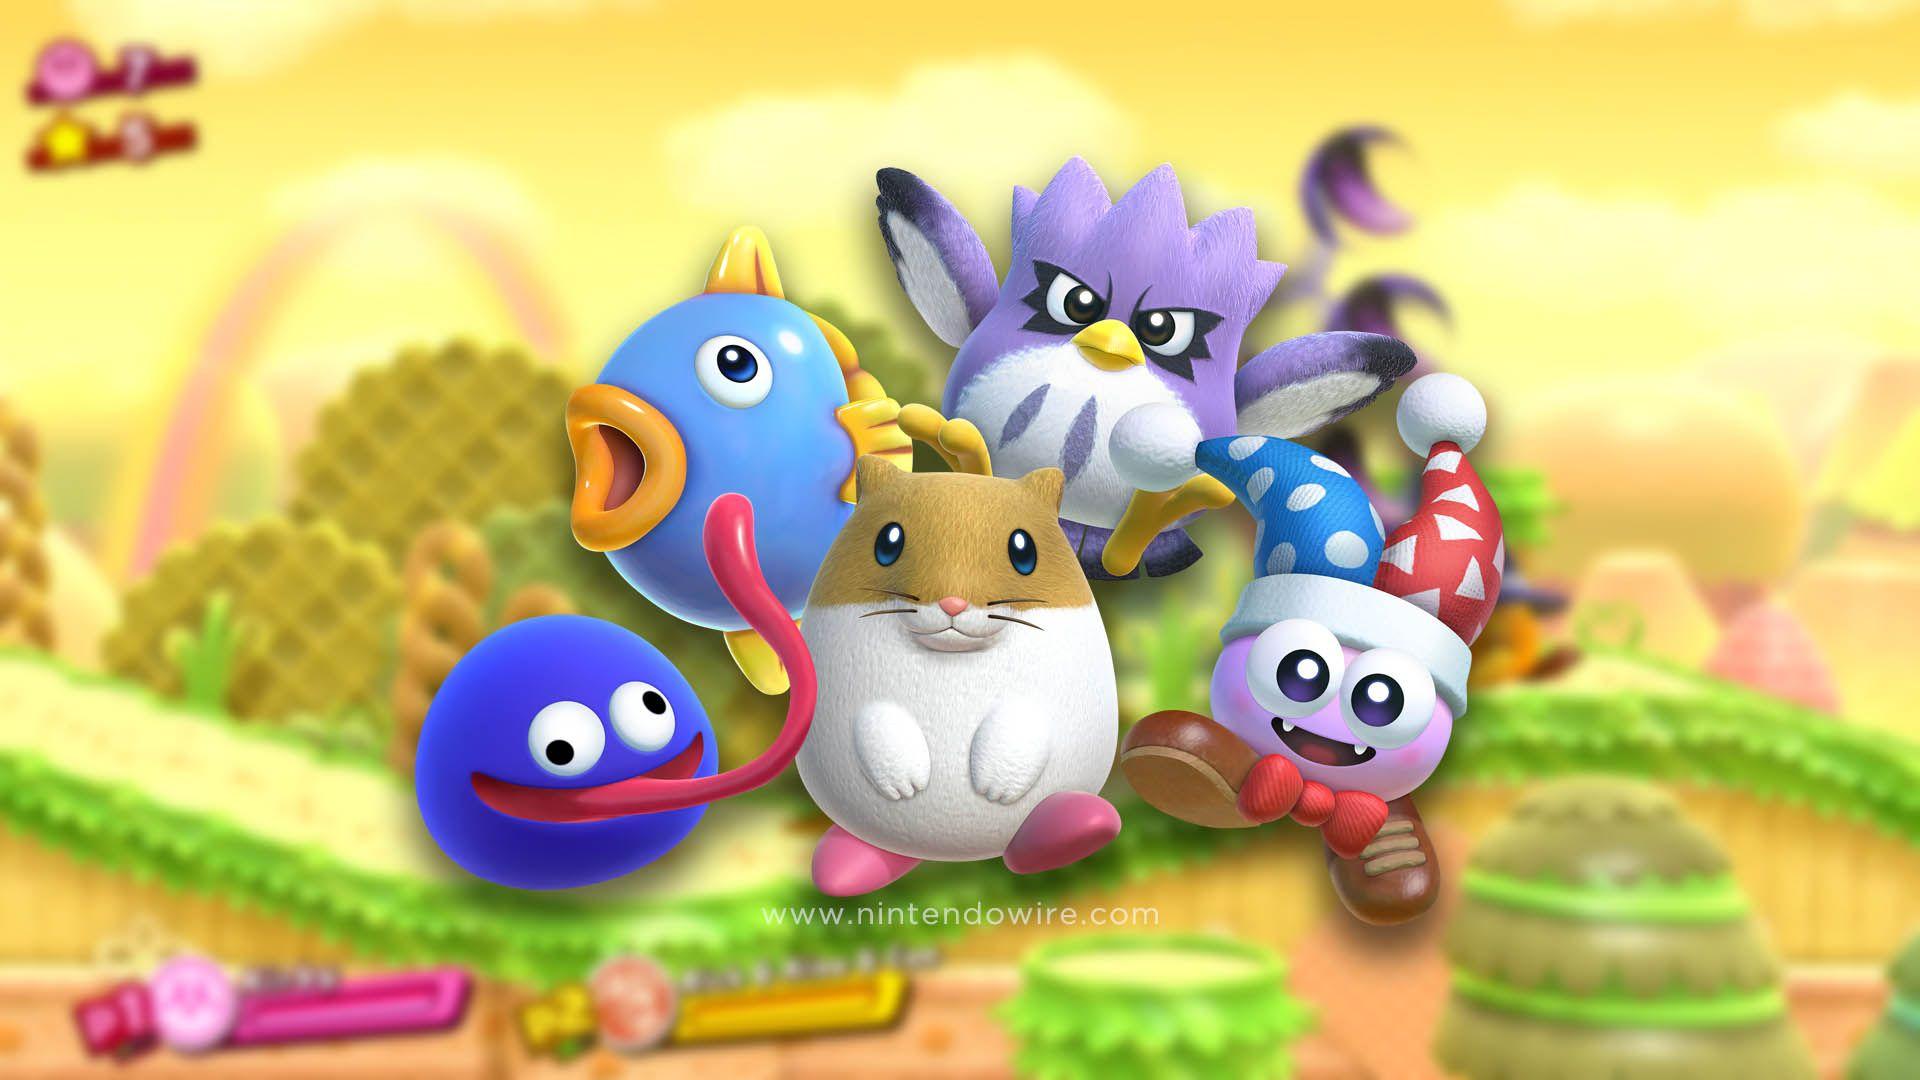 Another new Dream Friend teased for Kirby Star Allies.